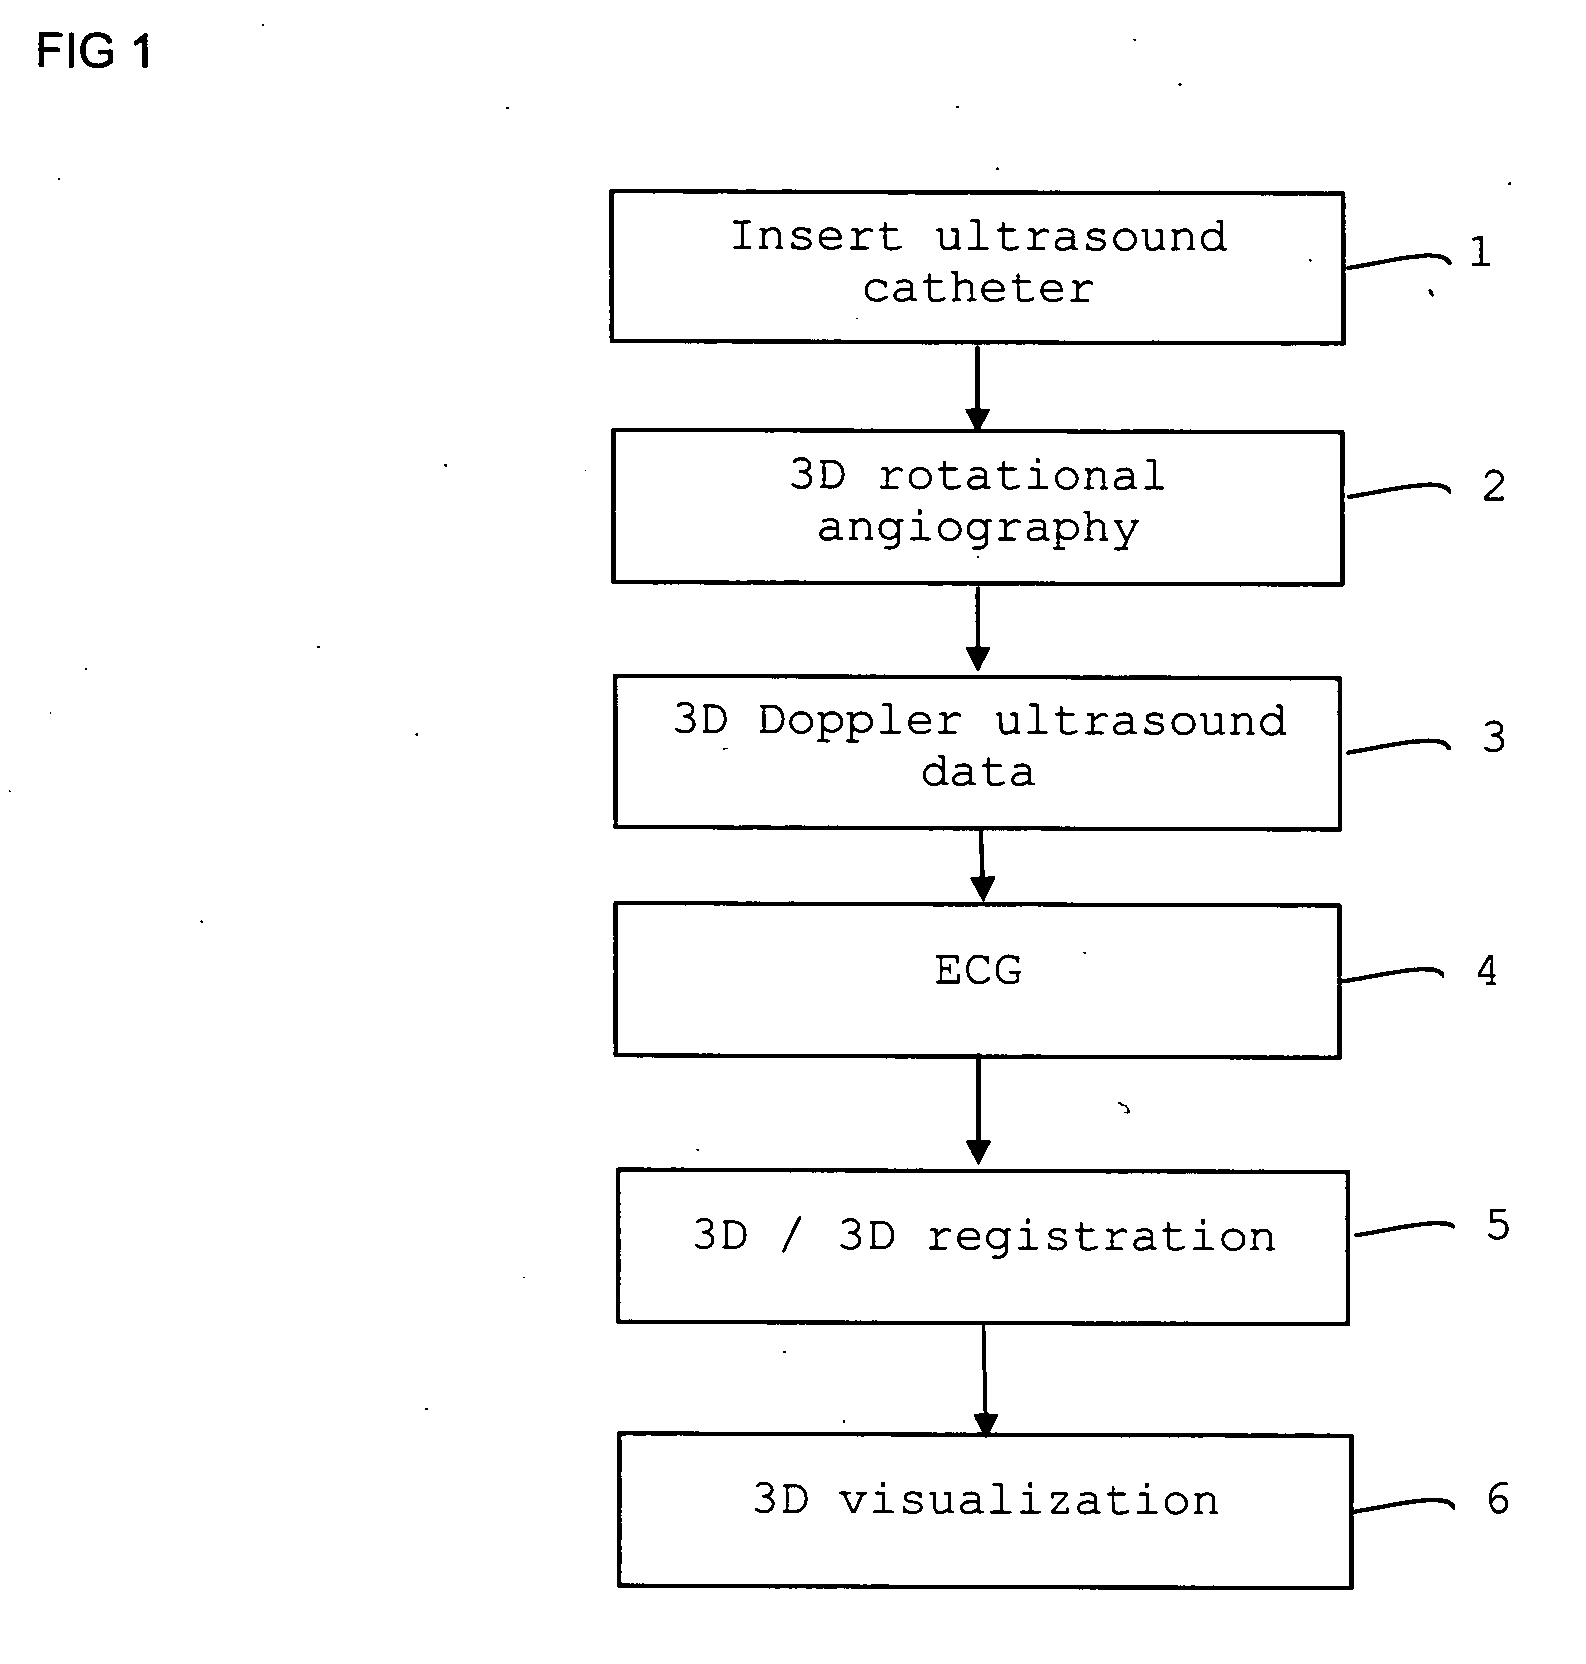 Method for generating and displaying examination images and associated ultrasound catheter